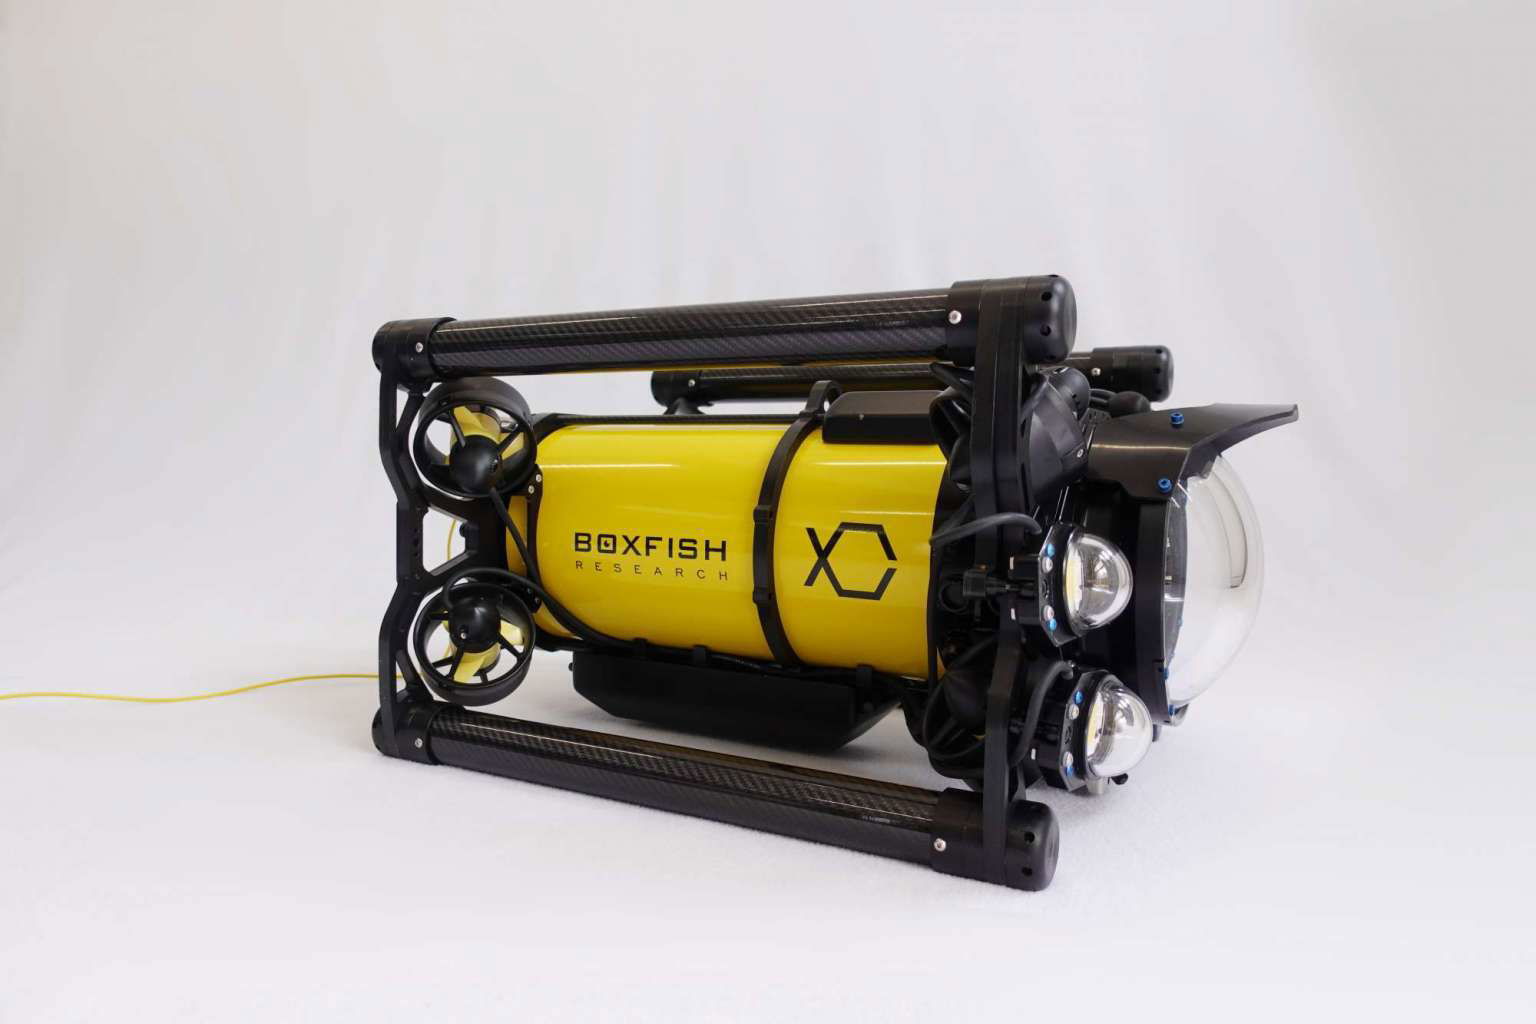 Boxfish launches a new generation of its underwater cinematography vehicles